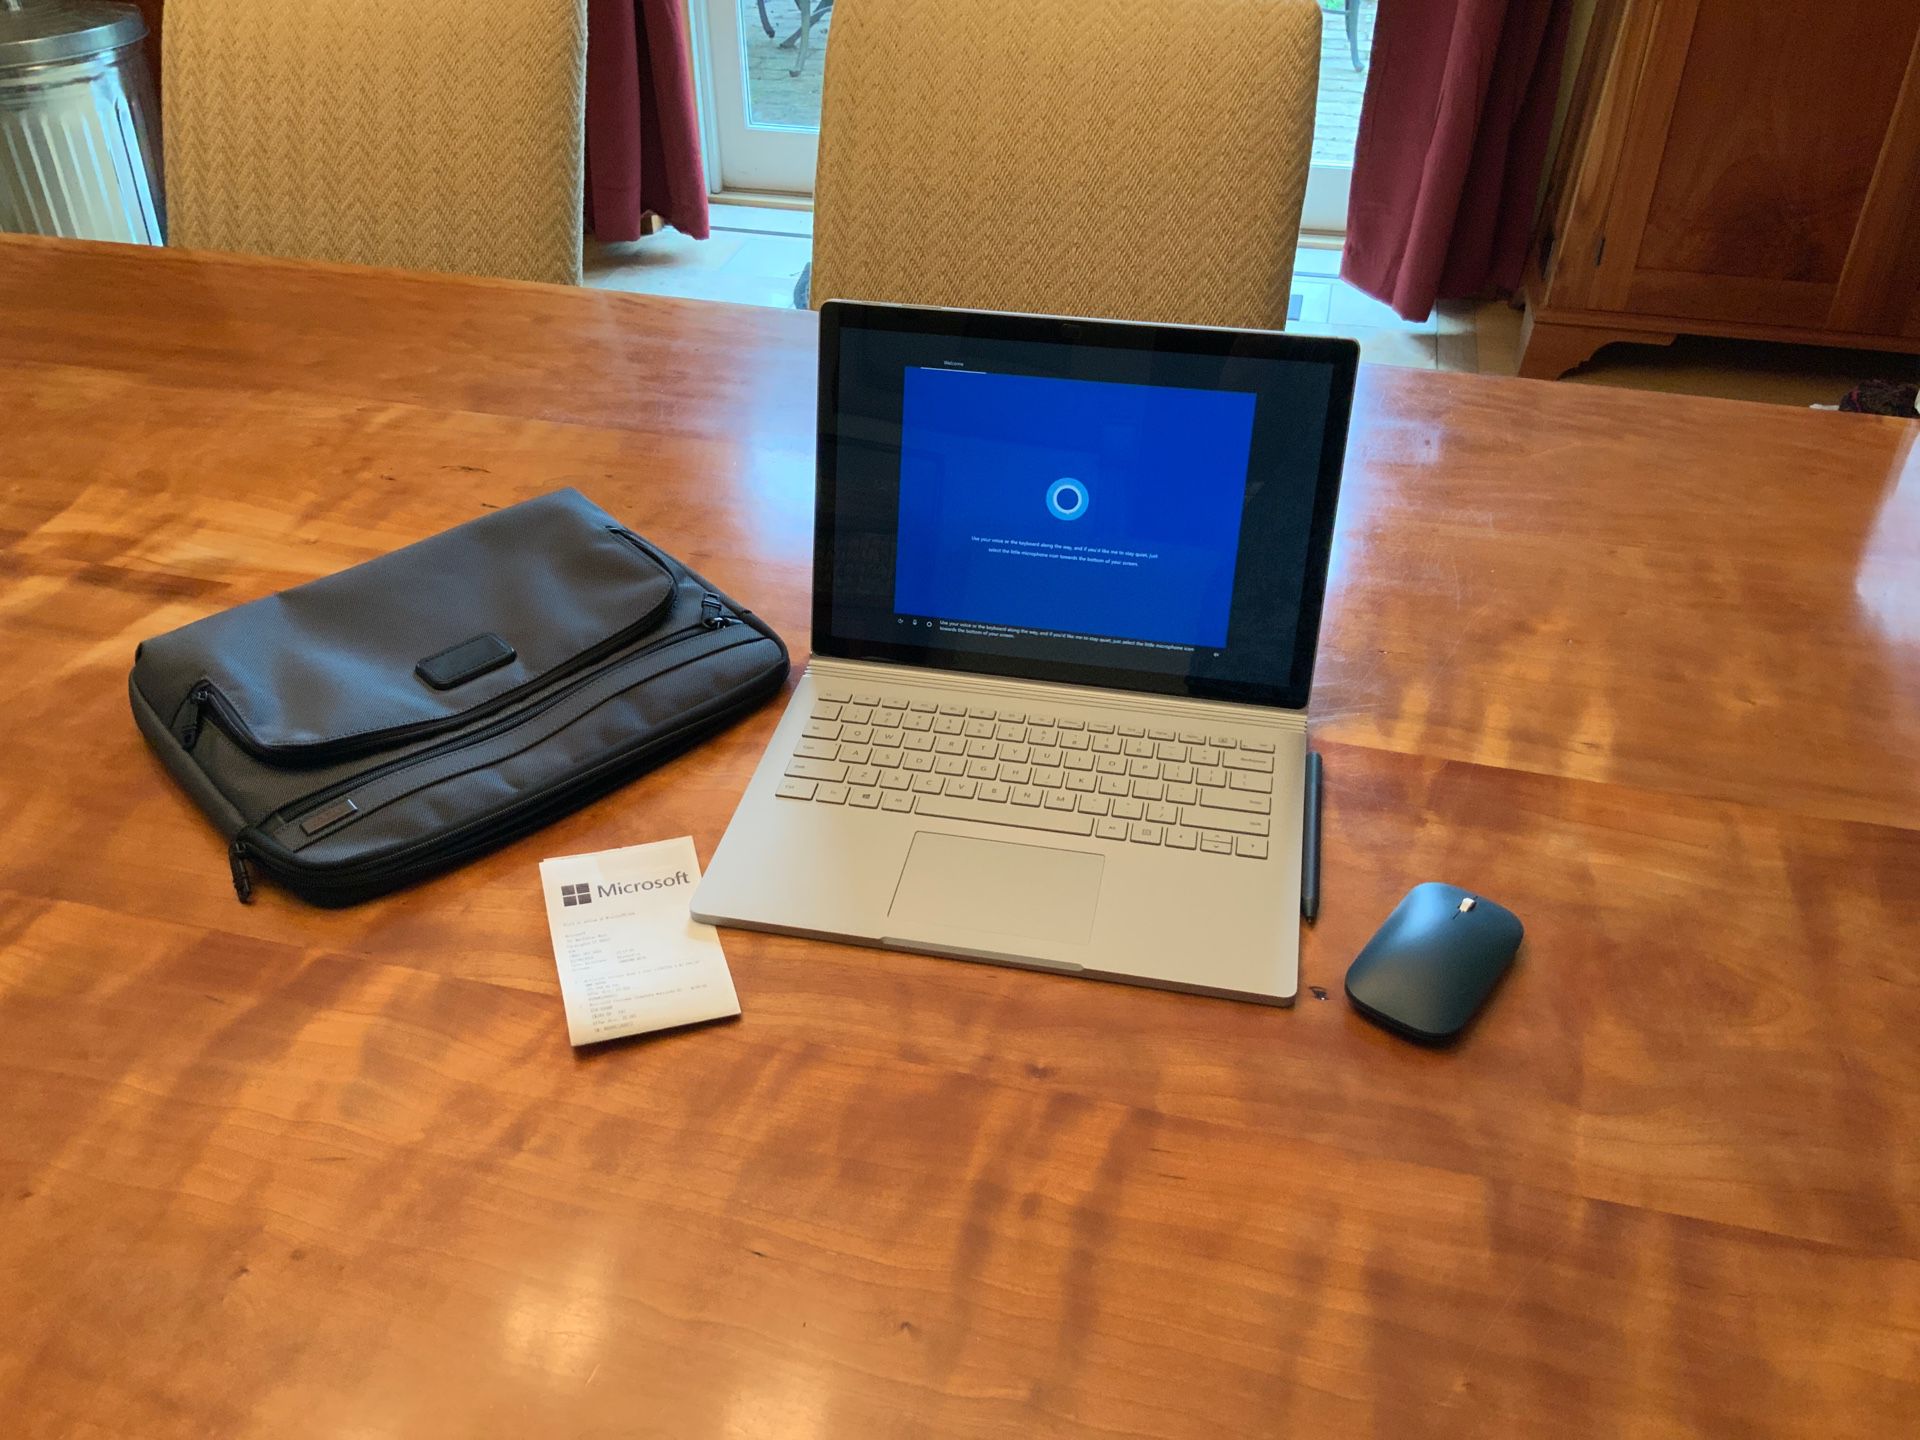 Microsoft Surface Book 2 - 13 inch i7/8/256 with Consumer Complete Warranty, Microsoft Office 365 Home, Sleeve, Mouse, USB adapter, and surface pen.